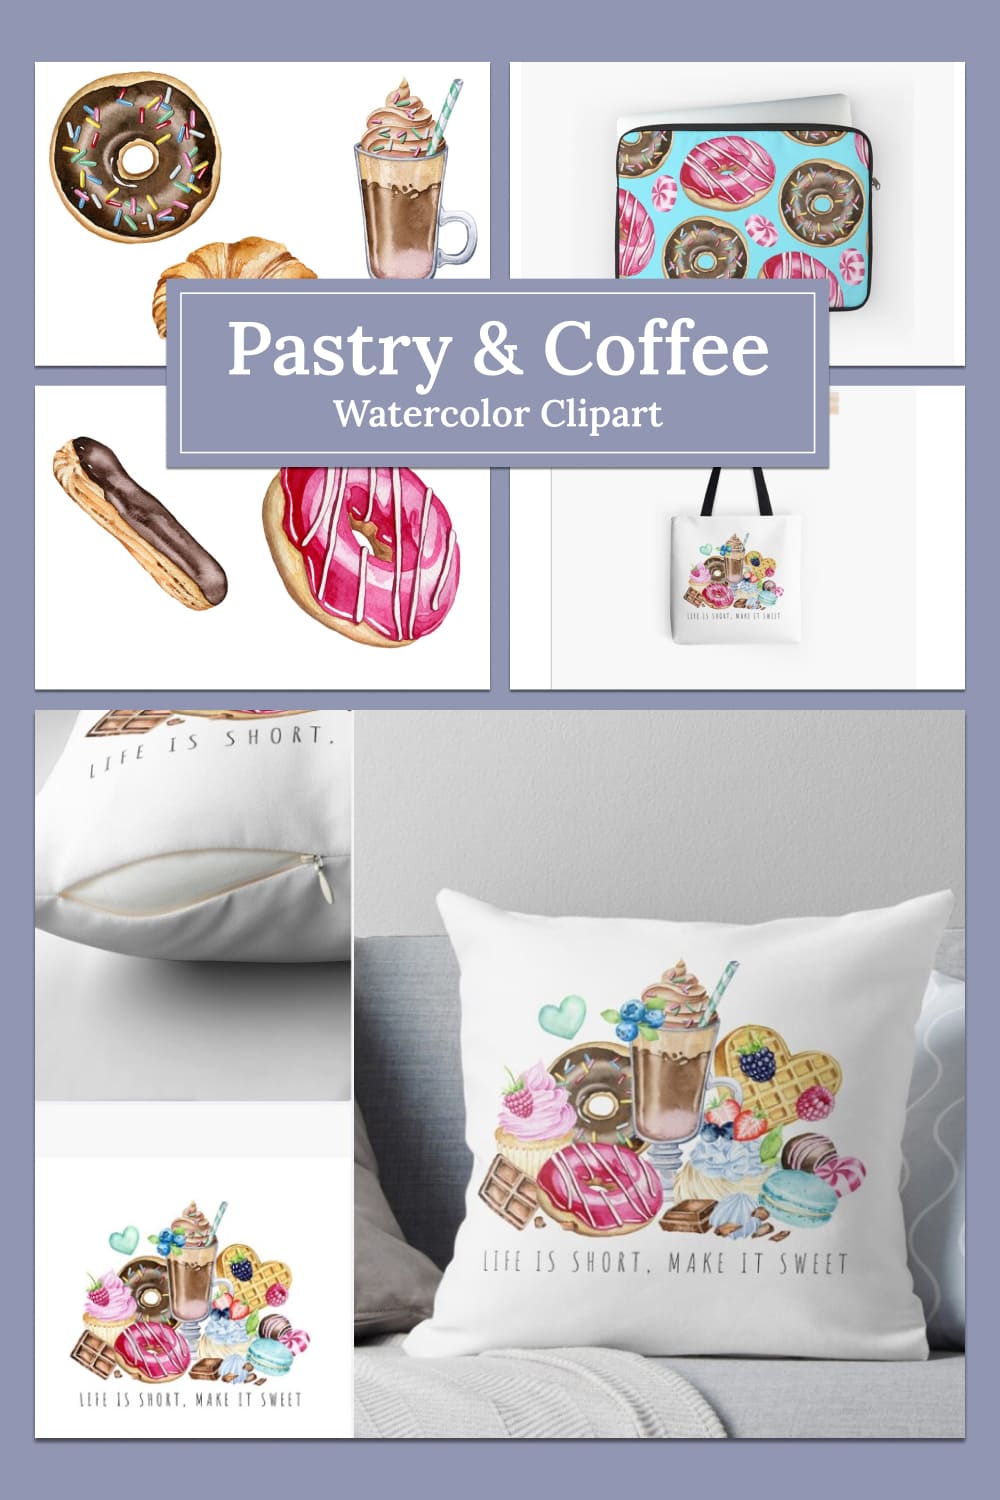 Pastry coffee watercolor clipart - pinterest image preview.